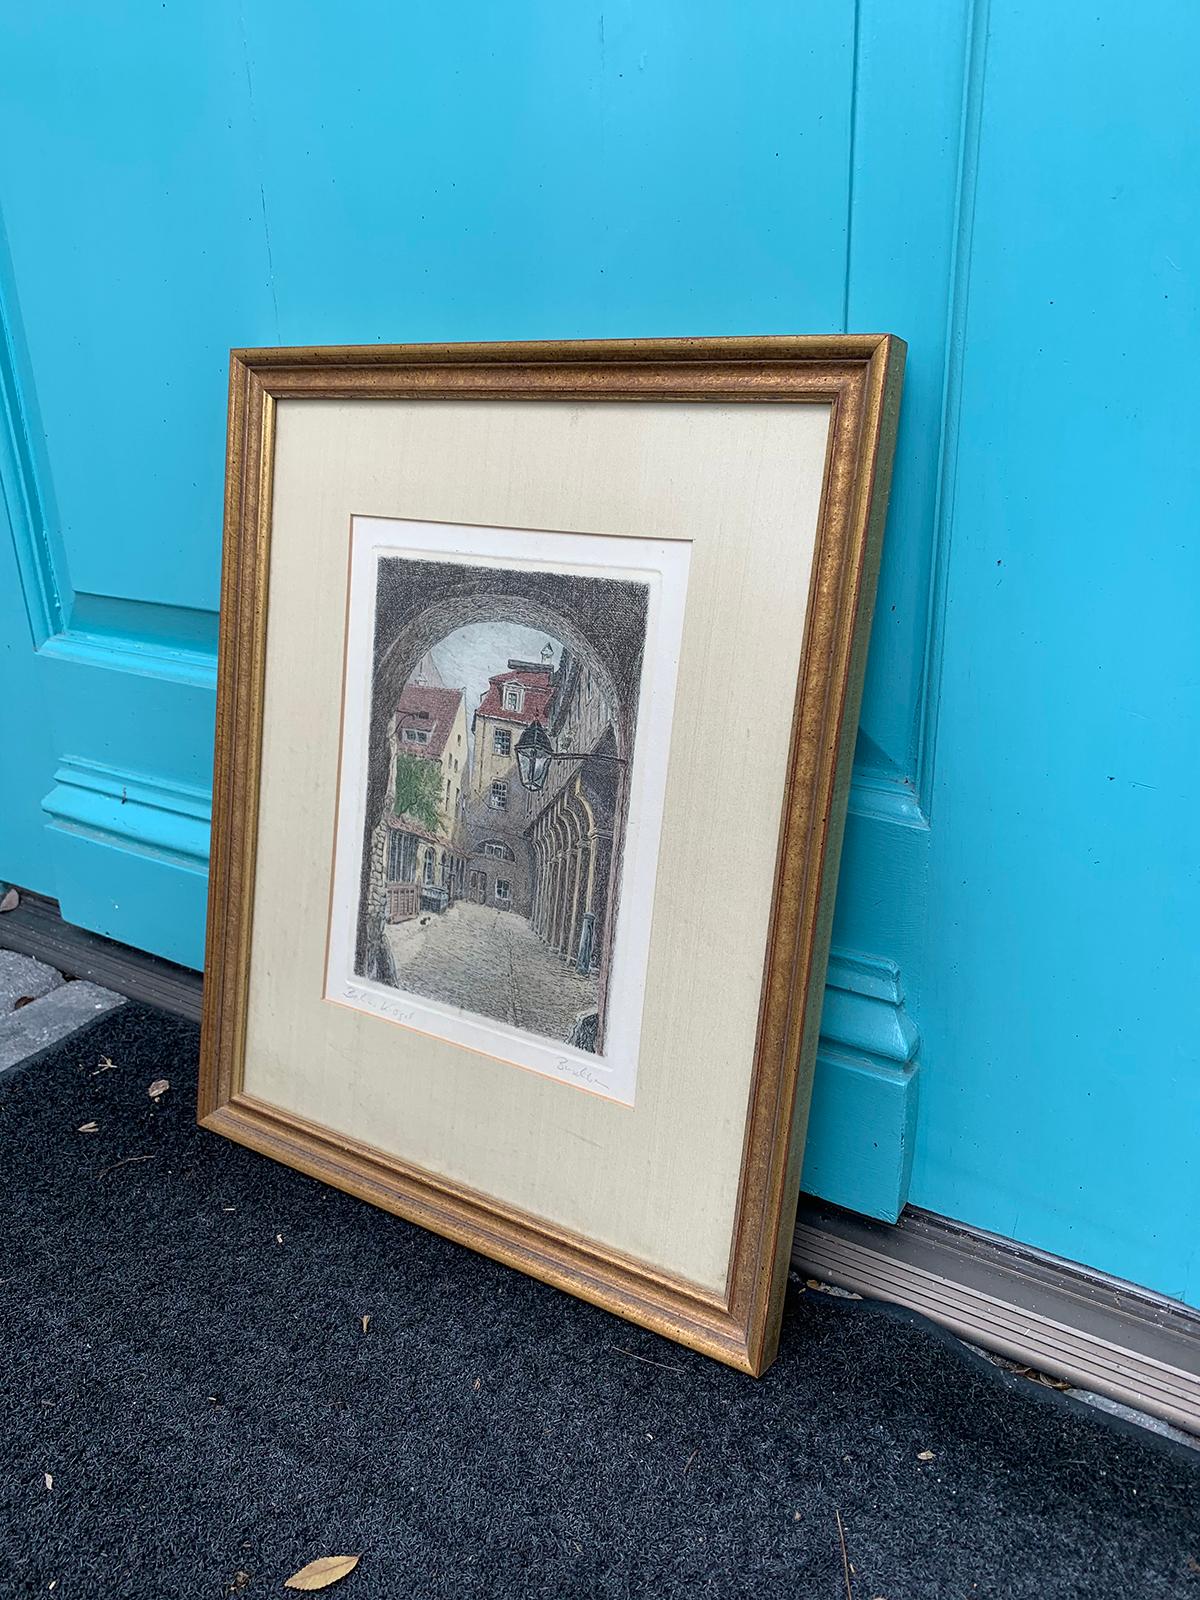 Early 20th Century 20th Century Etching of Town through Archway in Gilt Frame, Signed Buschbaum For Sale